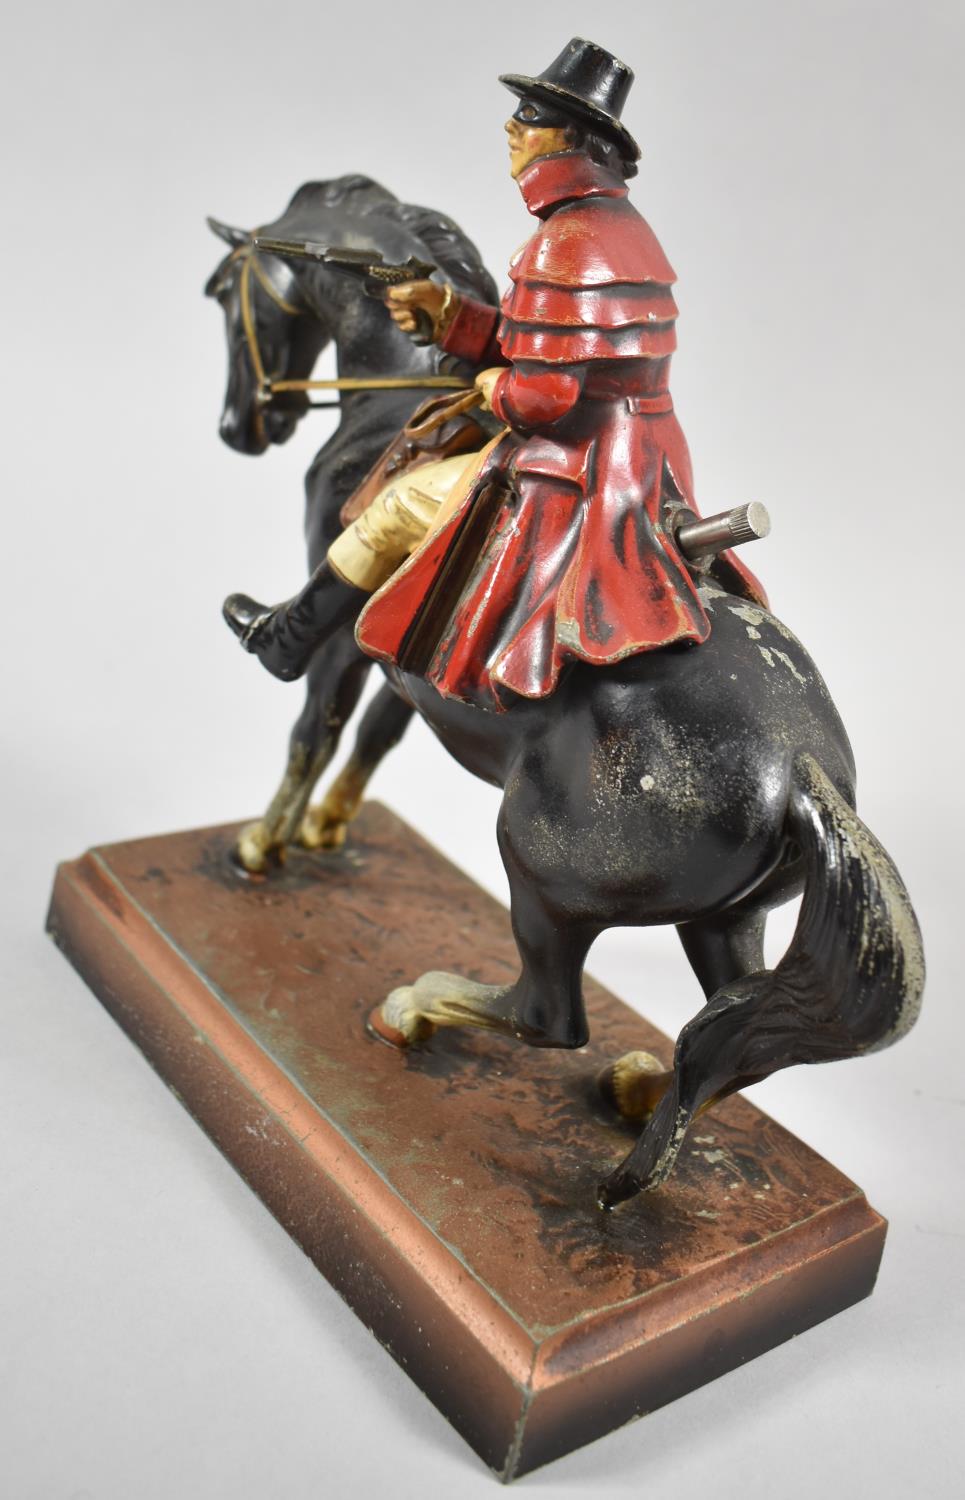 A Vintage Novelty Table Lighter in the form of Dick Turpin on Black Bess, Rectangular Plinth 18cm - Image 2 of 2